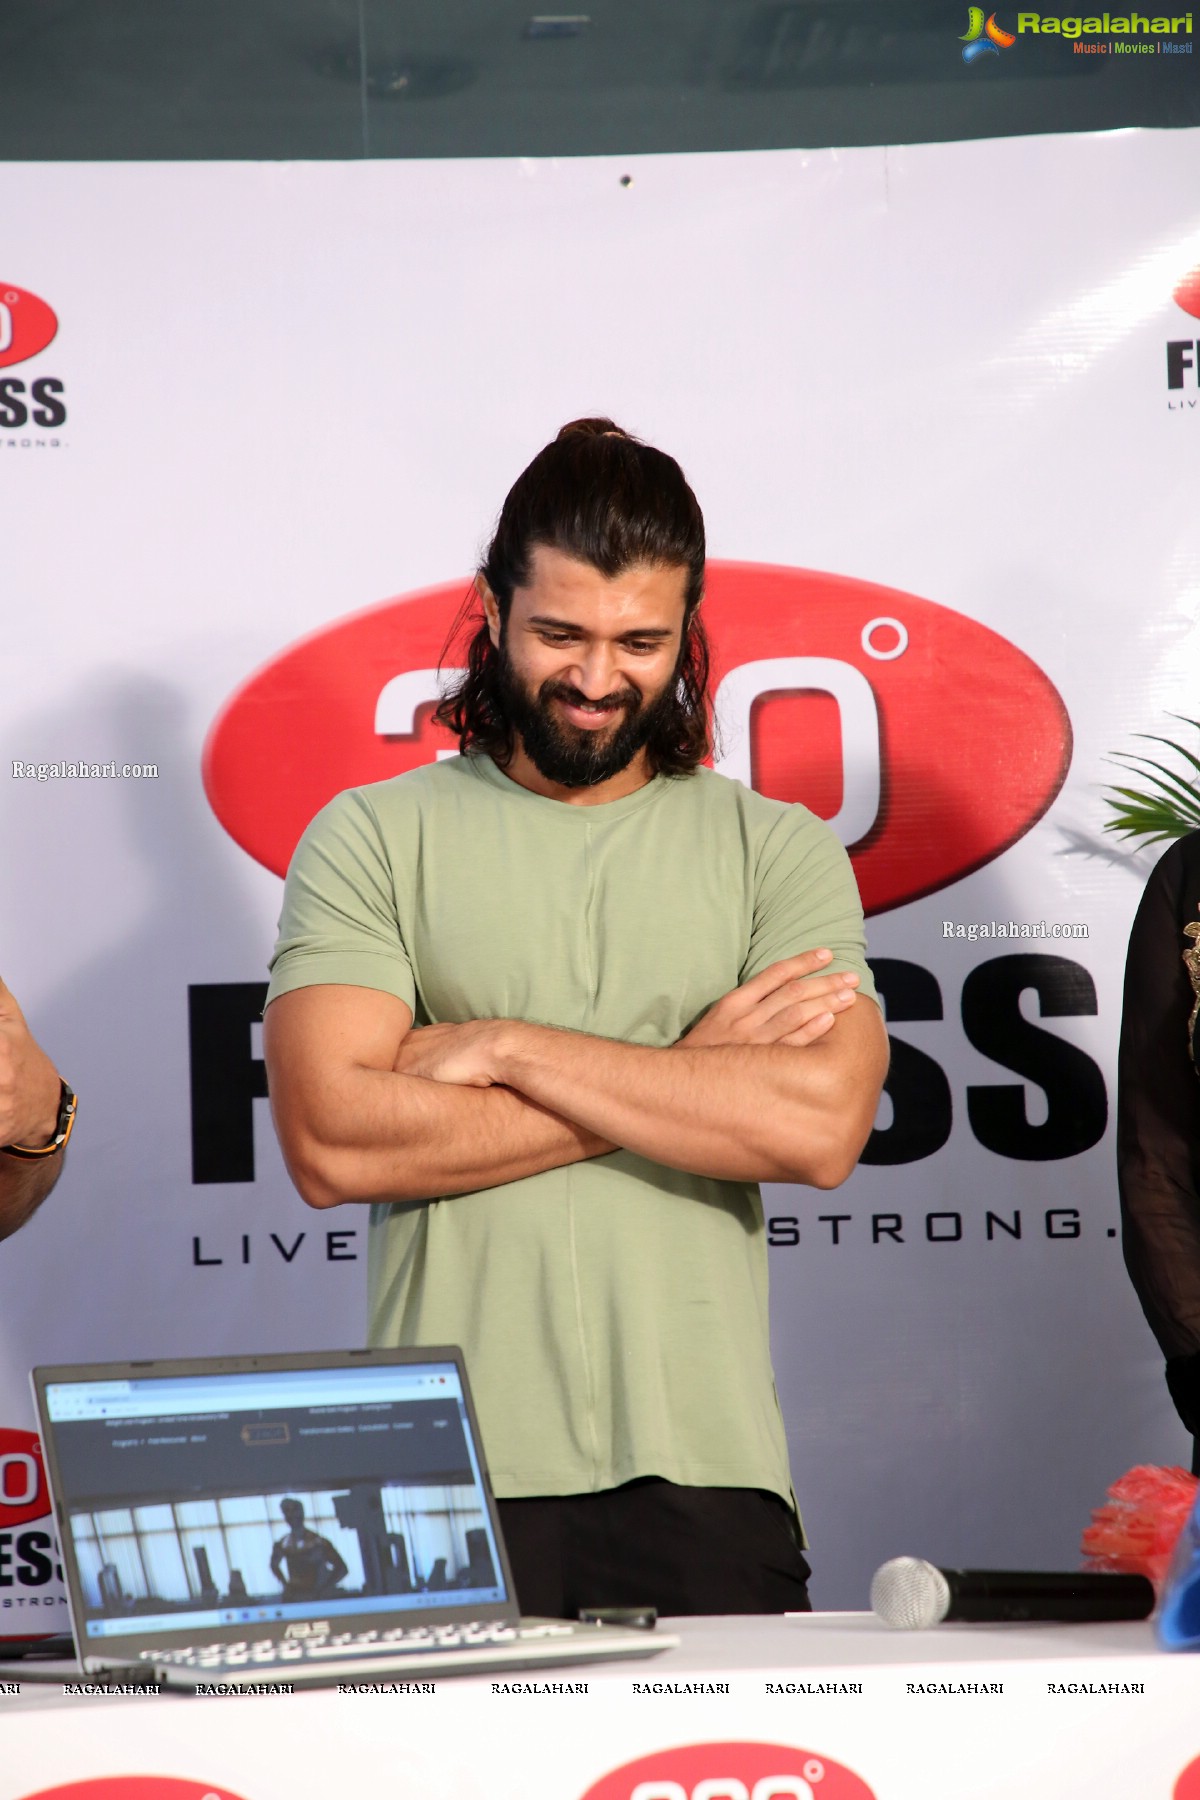 360 Degrees Fitness Launches Website and Ultimate Weight Loss Challenge With Vijay Deverakonda